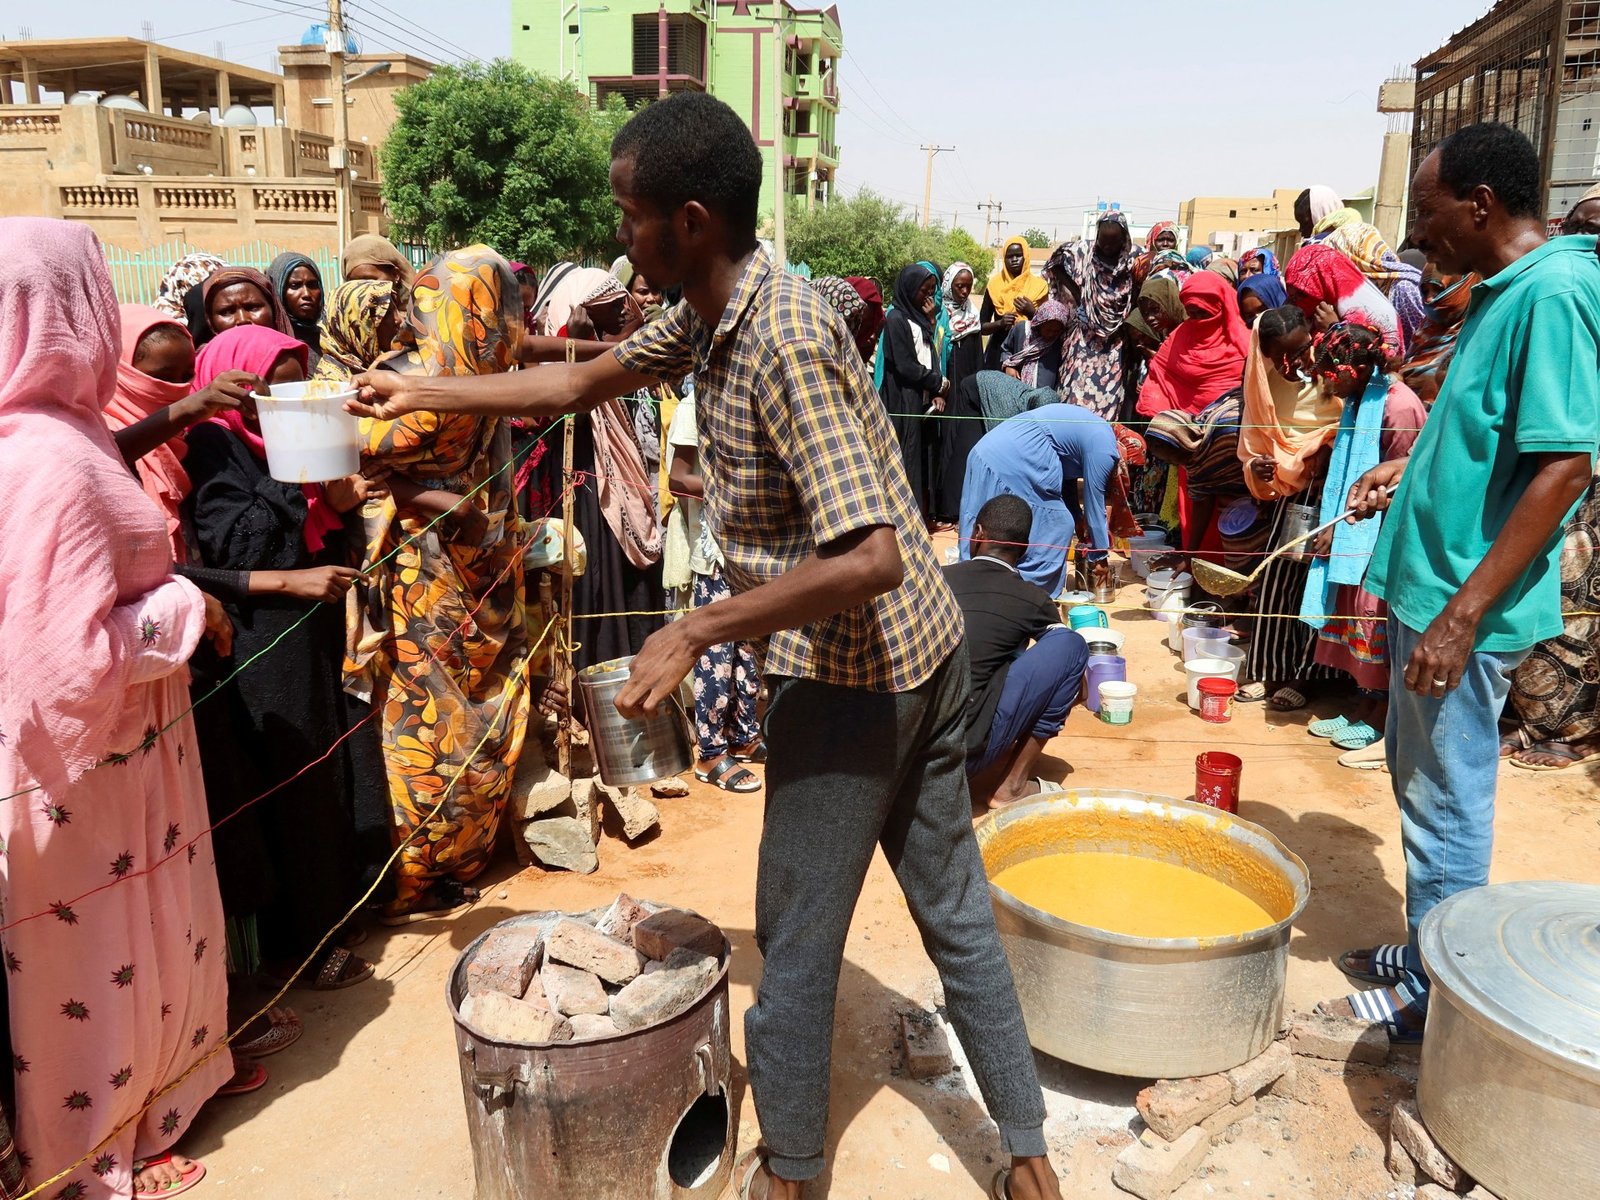 People dying of starvation in Sudan UN food agency says | Hunger News